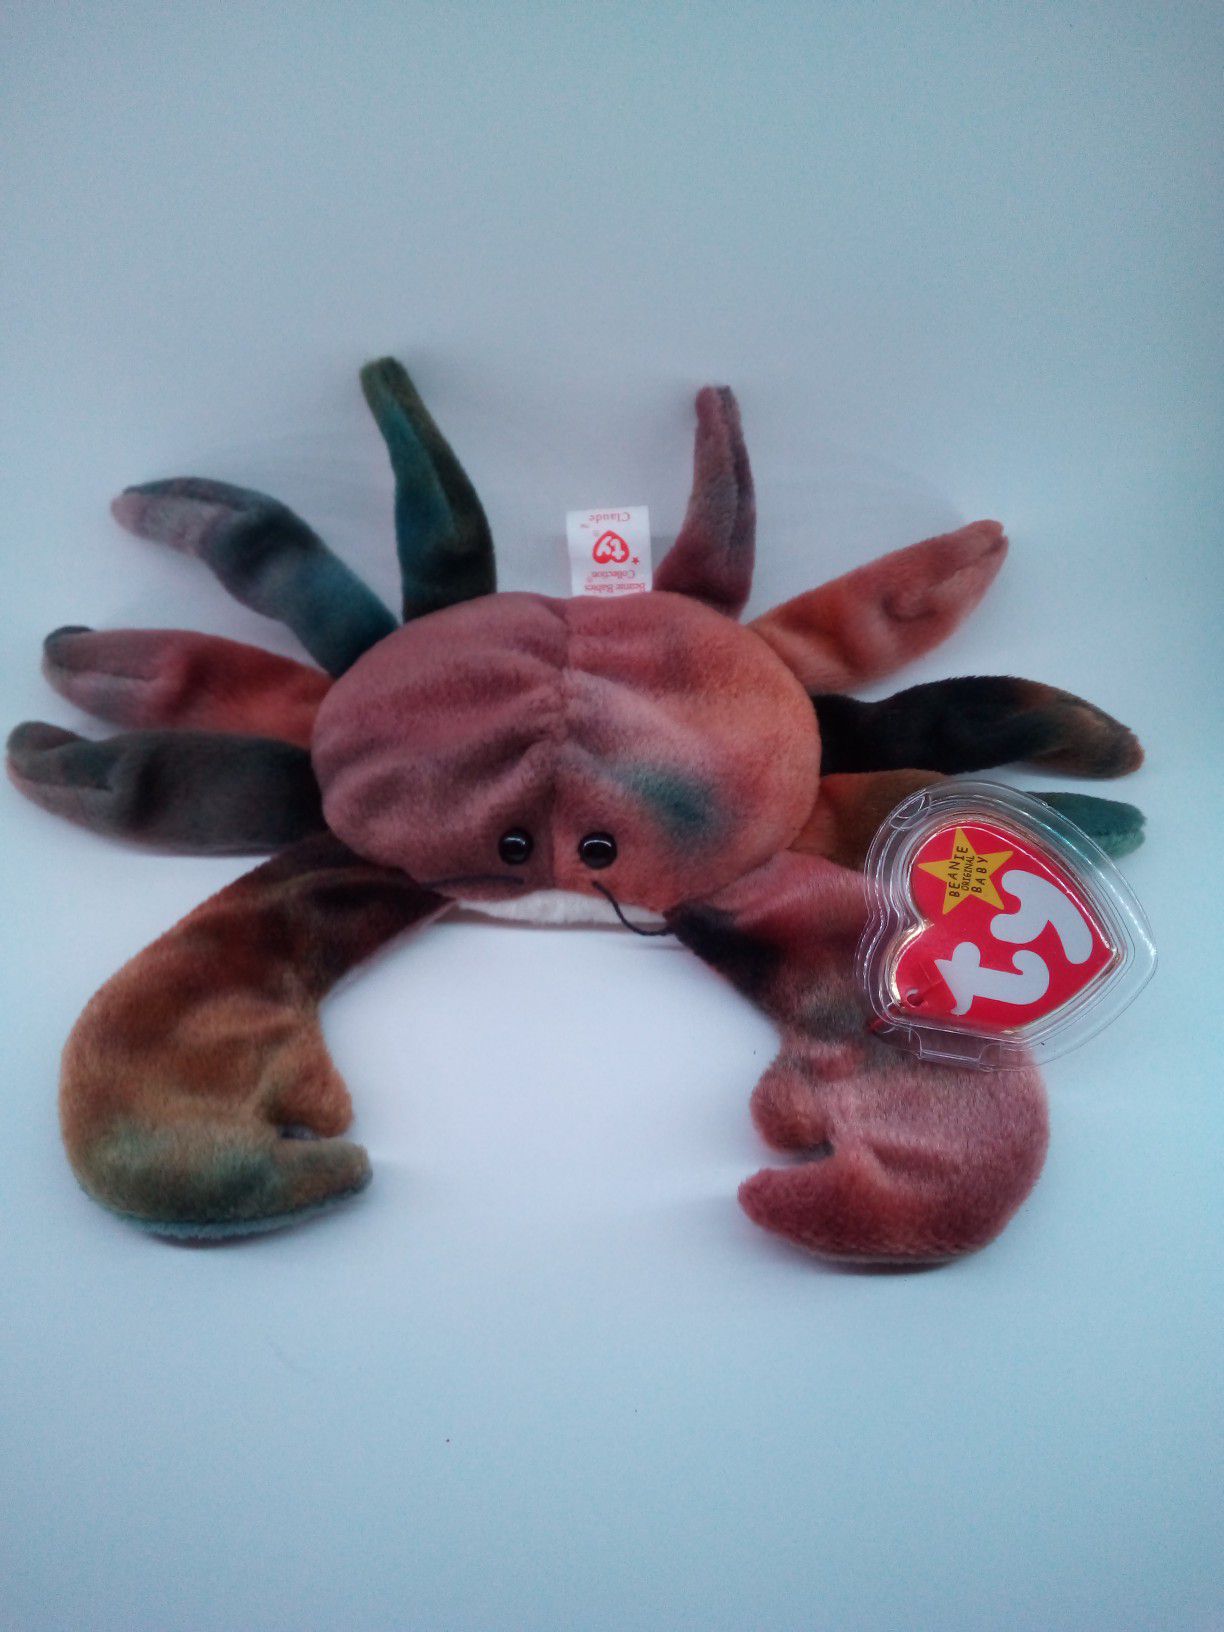 Ultra-Rare Ty Beanie Baby "Claude" with tag errors!!